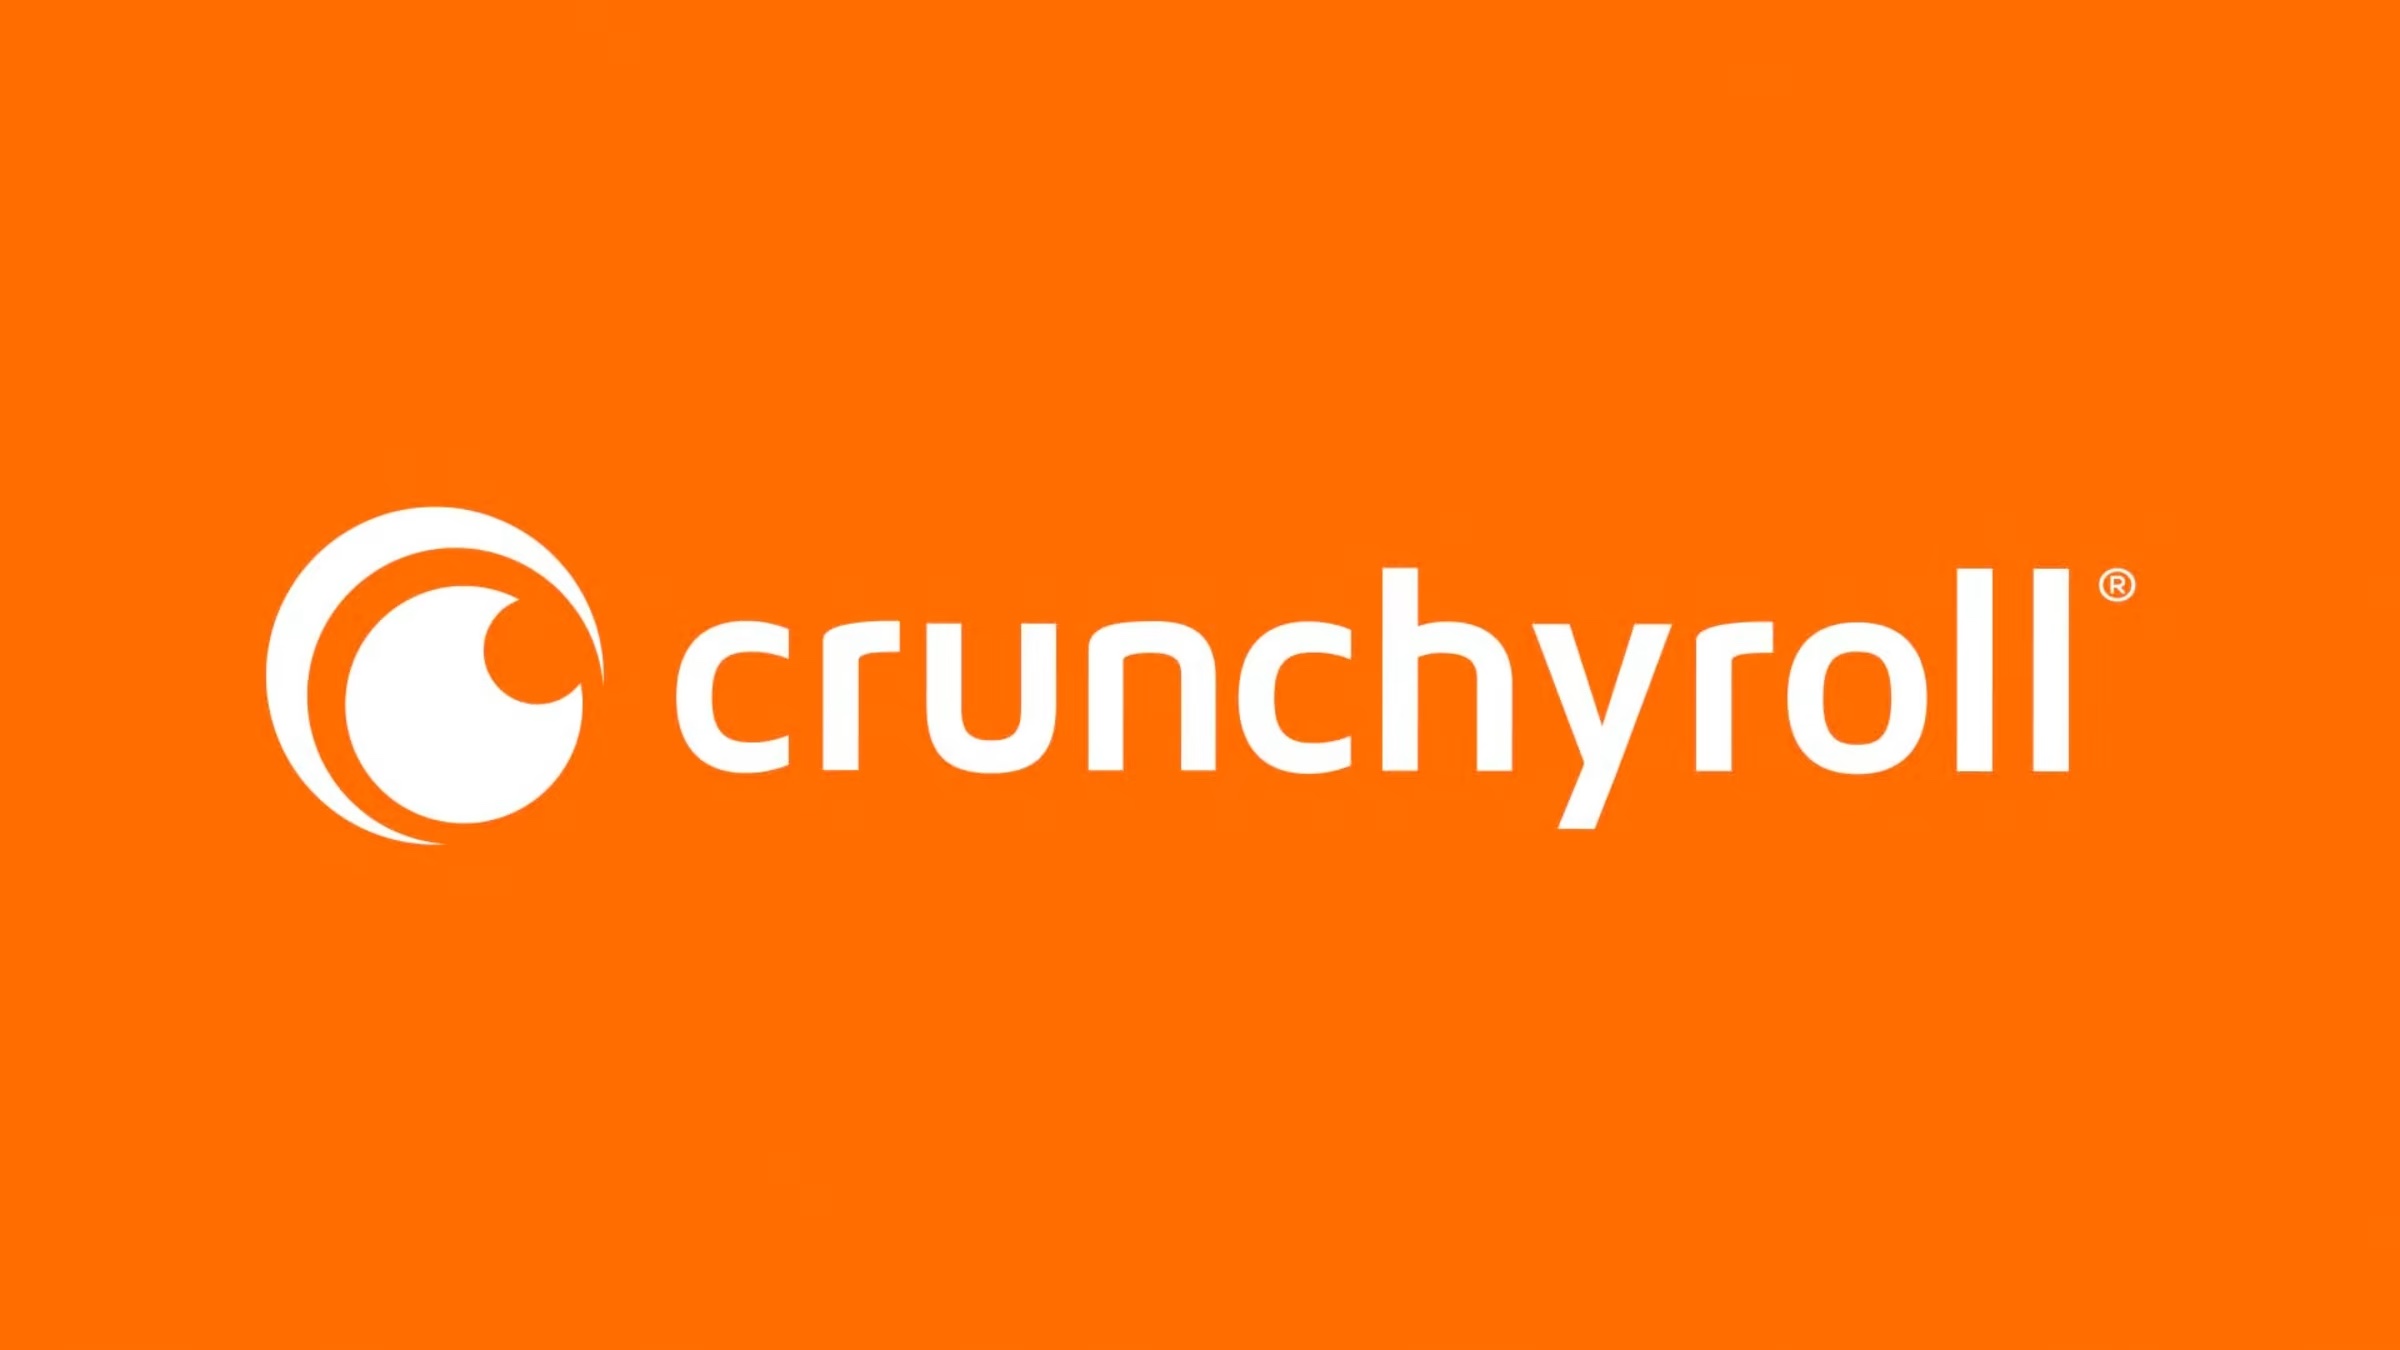 Crunchyroll Experimenting with AI for Subtitles, Confirms President